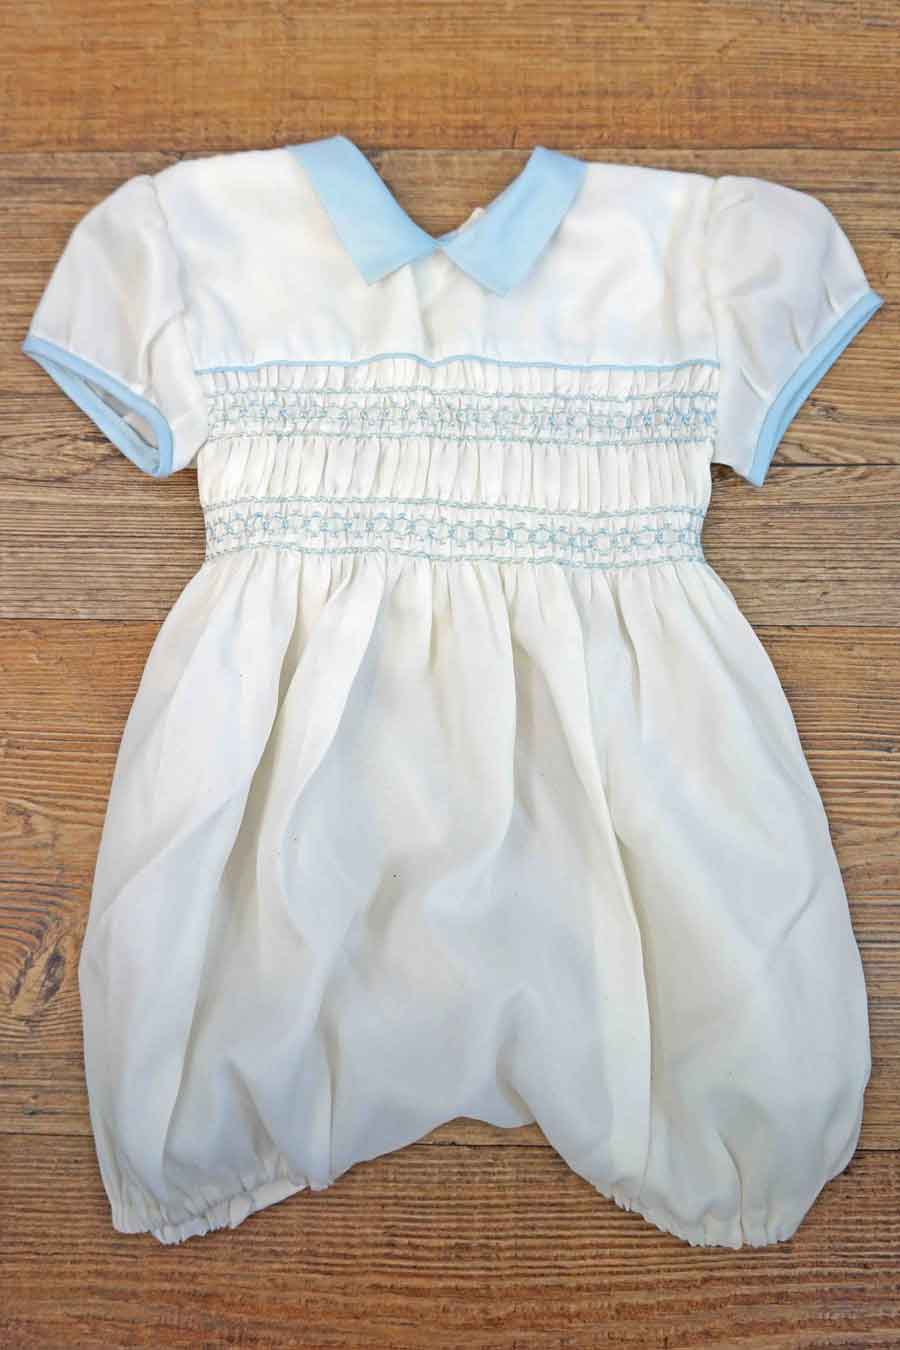 Vintage 1950s Boys Christening Outfit